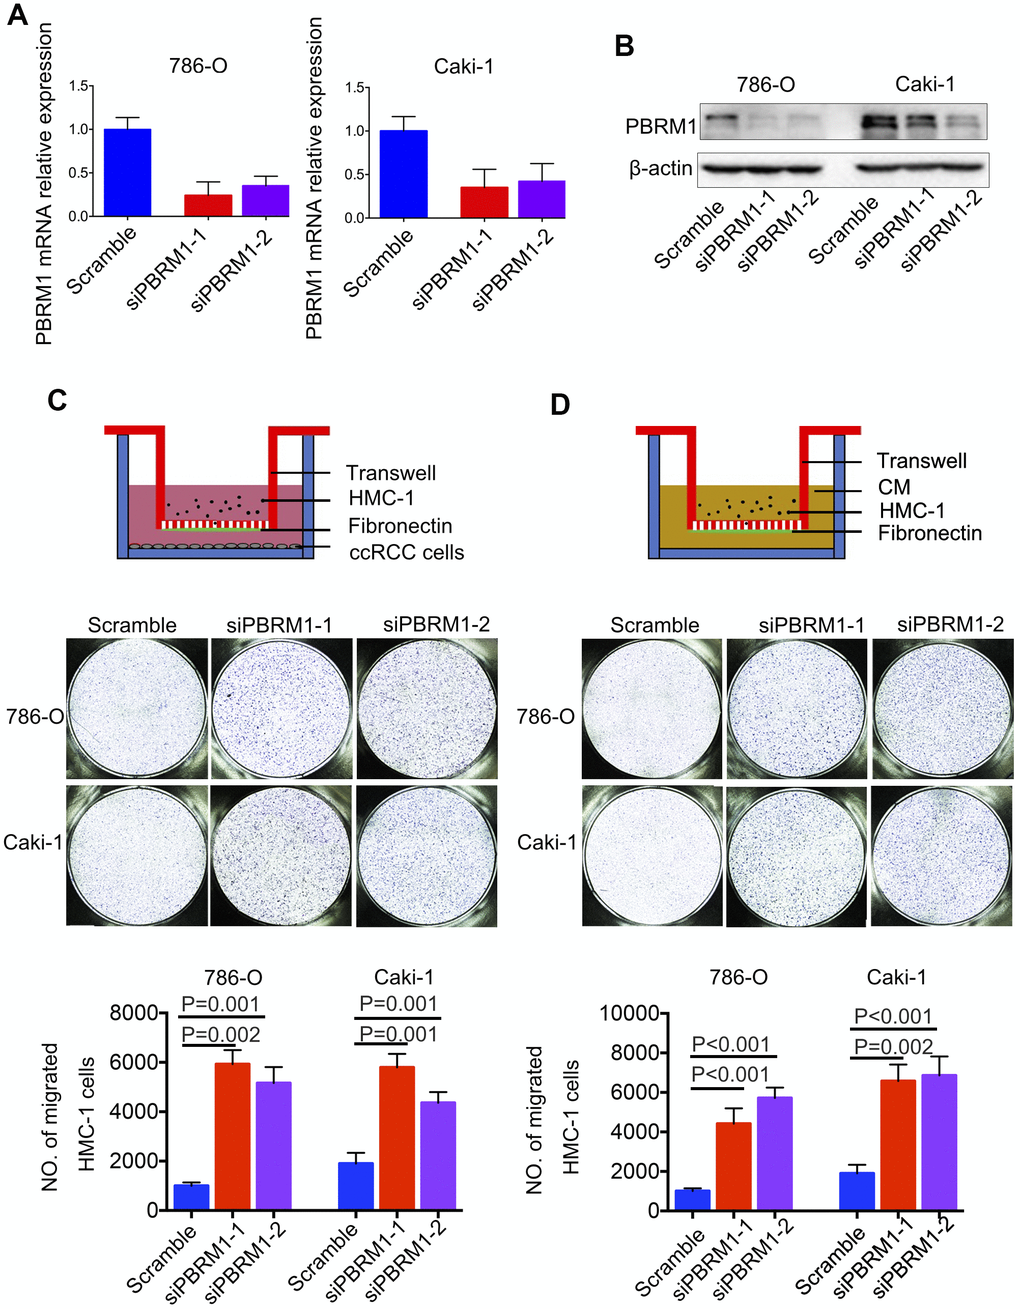 PBRM1-silenced ccRCC cells recruit significantly higher numbers of mast cells in vitro. (A) qRT-PCR and (B) Western blot analysis shows PBRM1 mRNA and protein levels in control and PBRM1-silenced 786-O and Caki-1 cells. (C, D) Transwell migration assay results show the total numbers of migrating HMC-1 cells when co-cultured with control and PBRM1-silenced 786-O and Caki-1 cells or the conditioned media from these cells. The migrating HMC-1 cells are stained with crystal violet and counted. The experiments were performed in triplicate and the results are shown as means±SD. Student’s t-test was used to determine statistical significance.